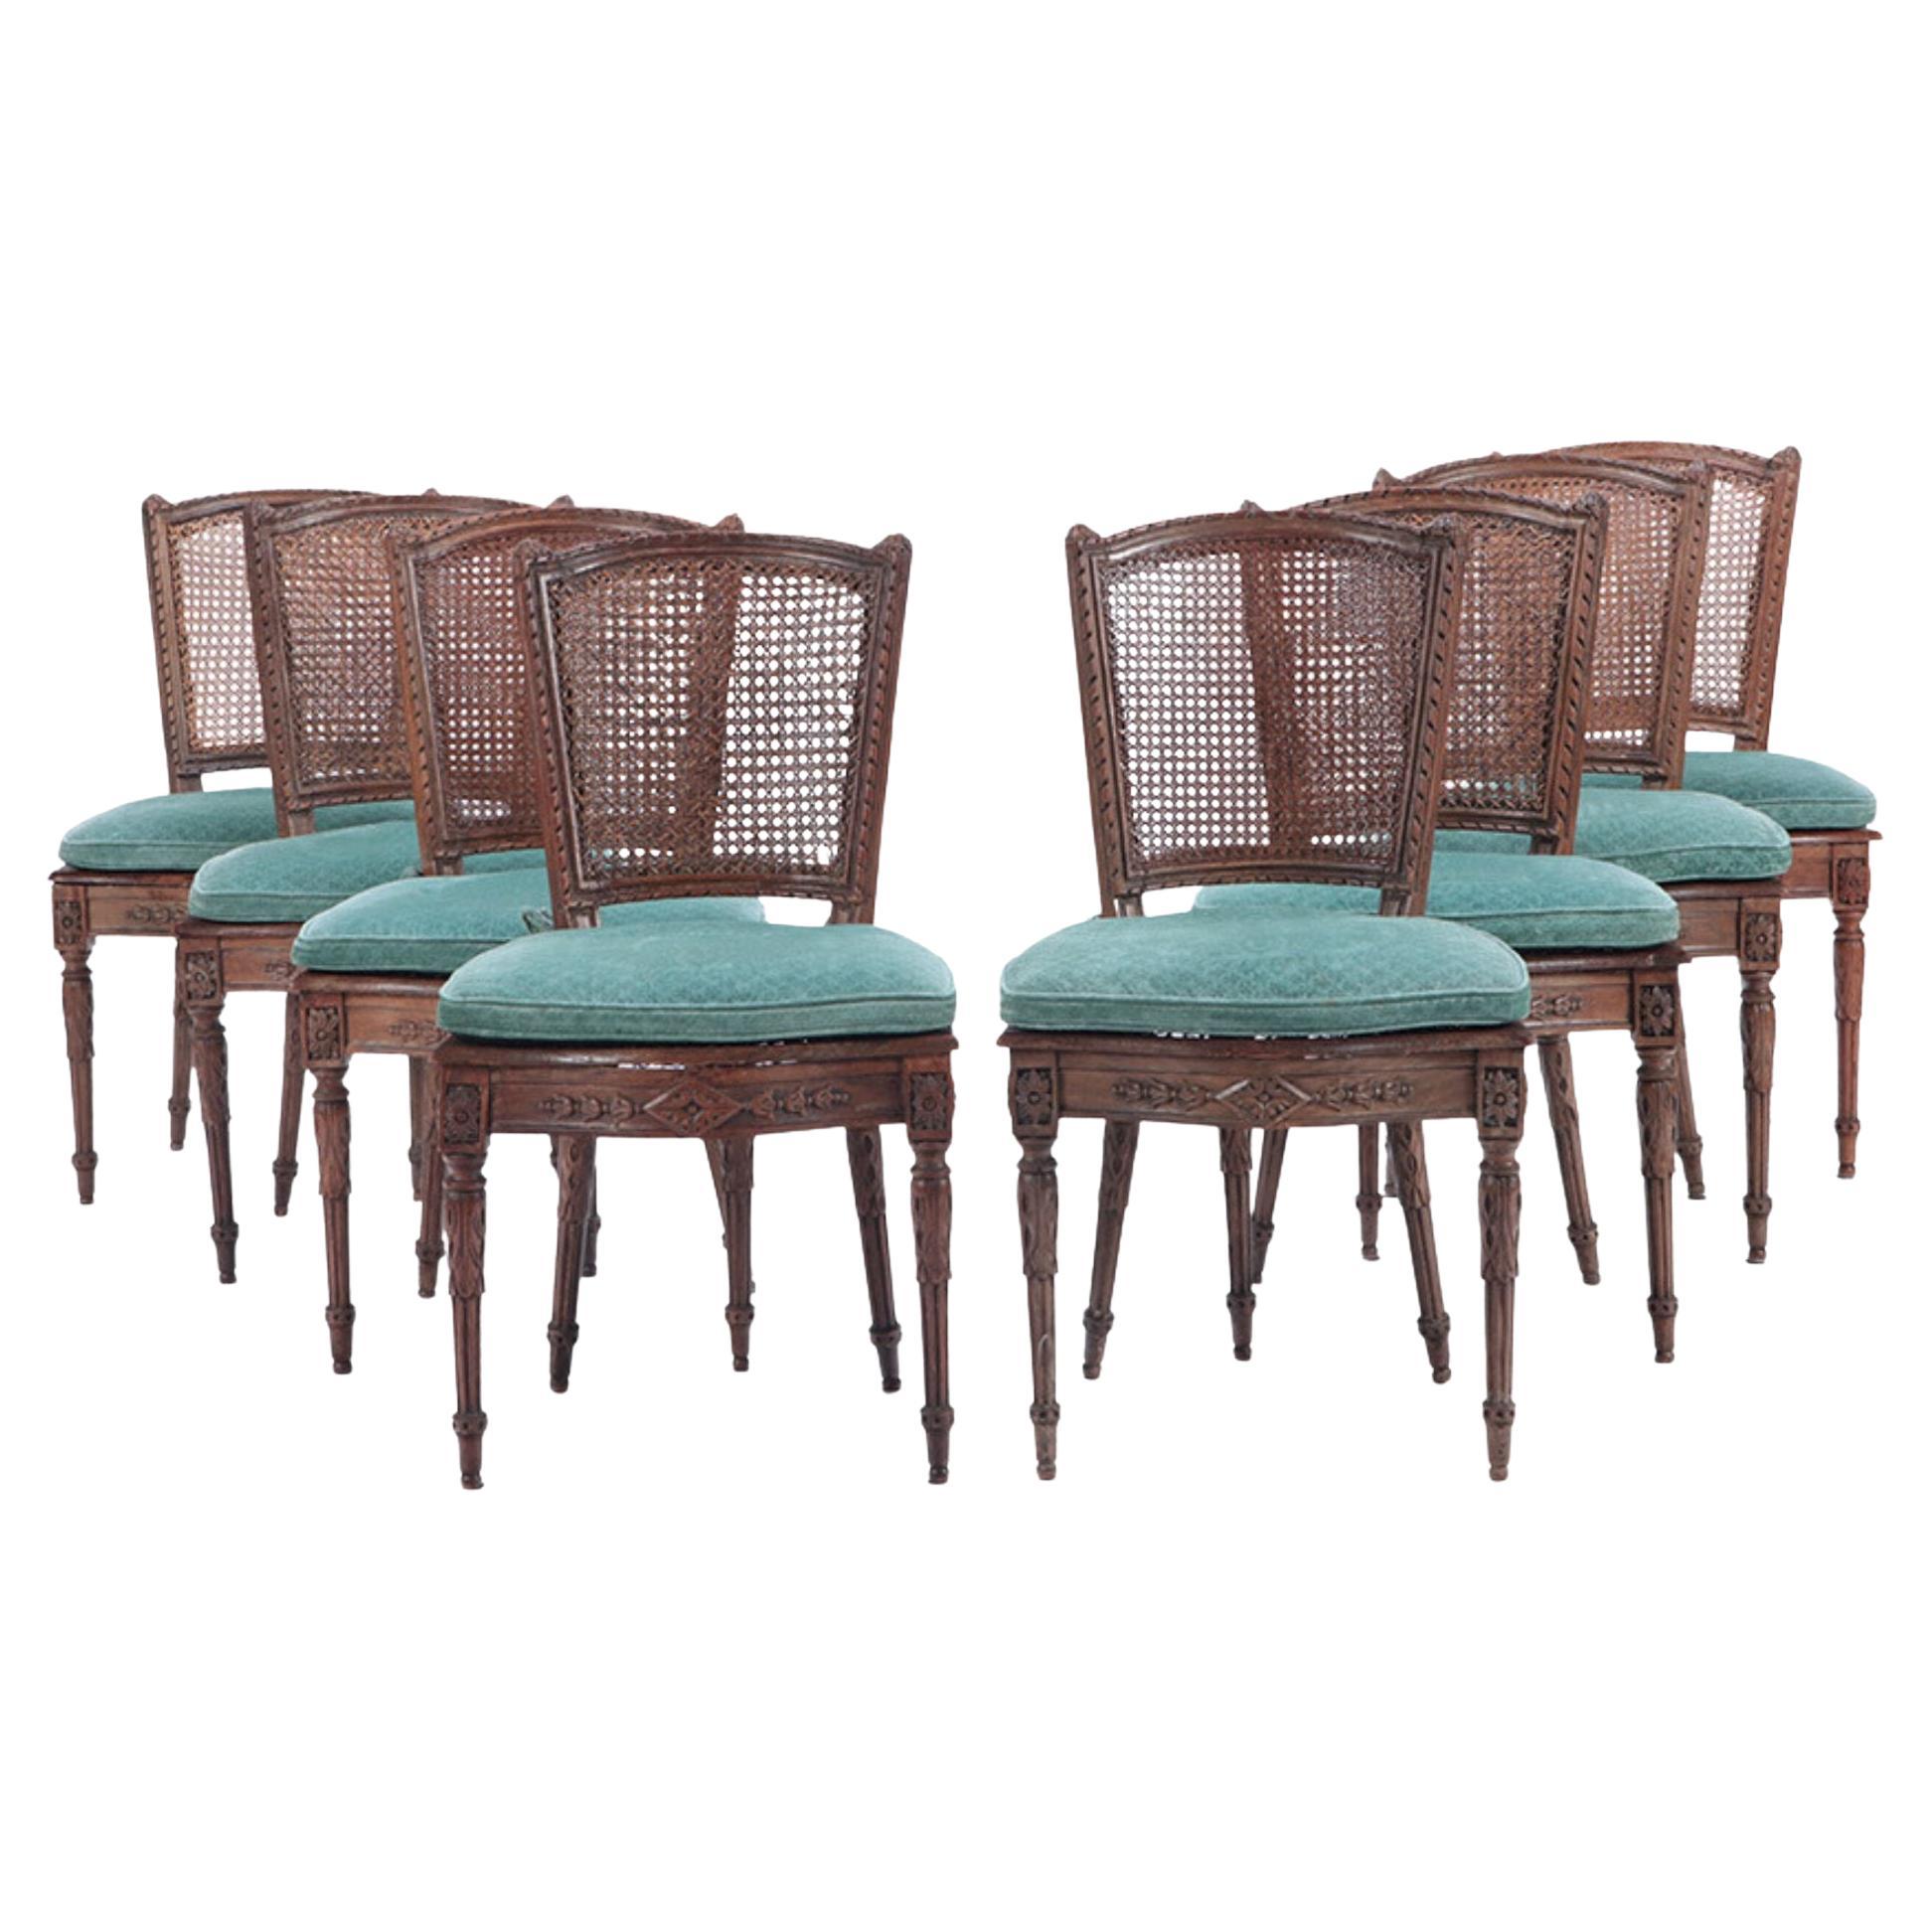 Set of Eight Walnut and Cane Dining Room Chairs, Early 19th Century